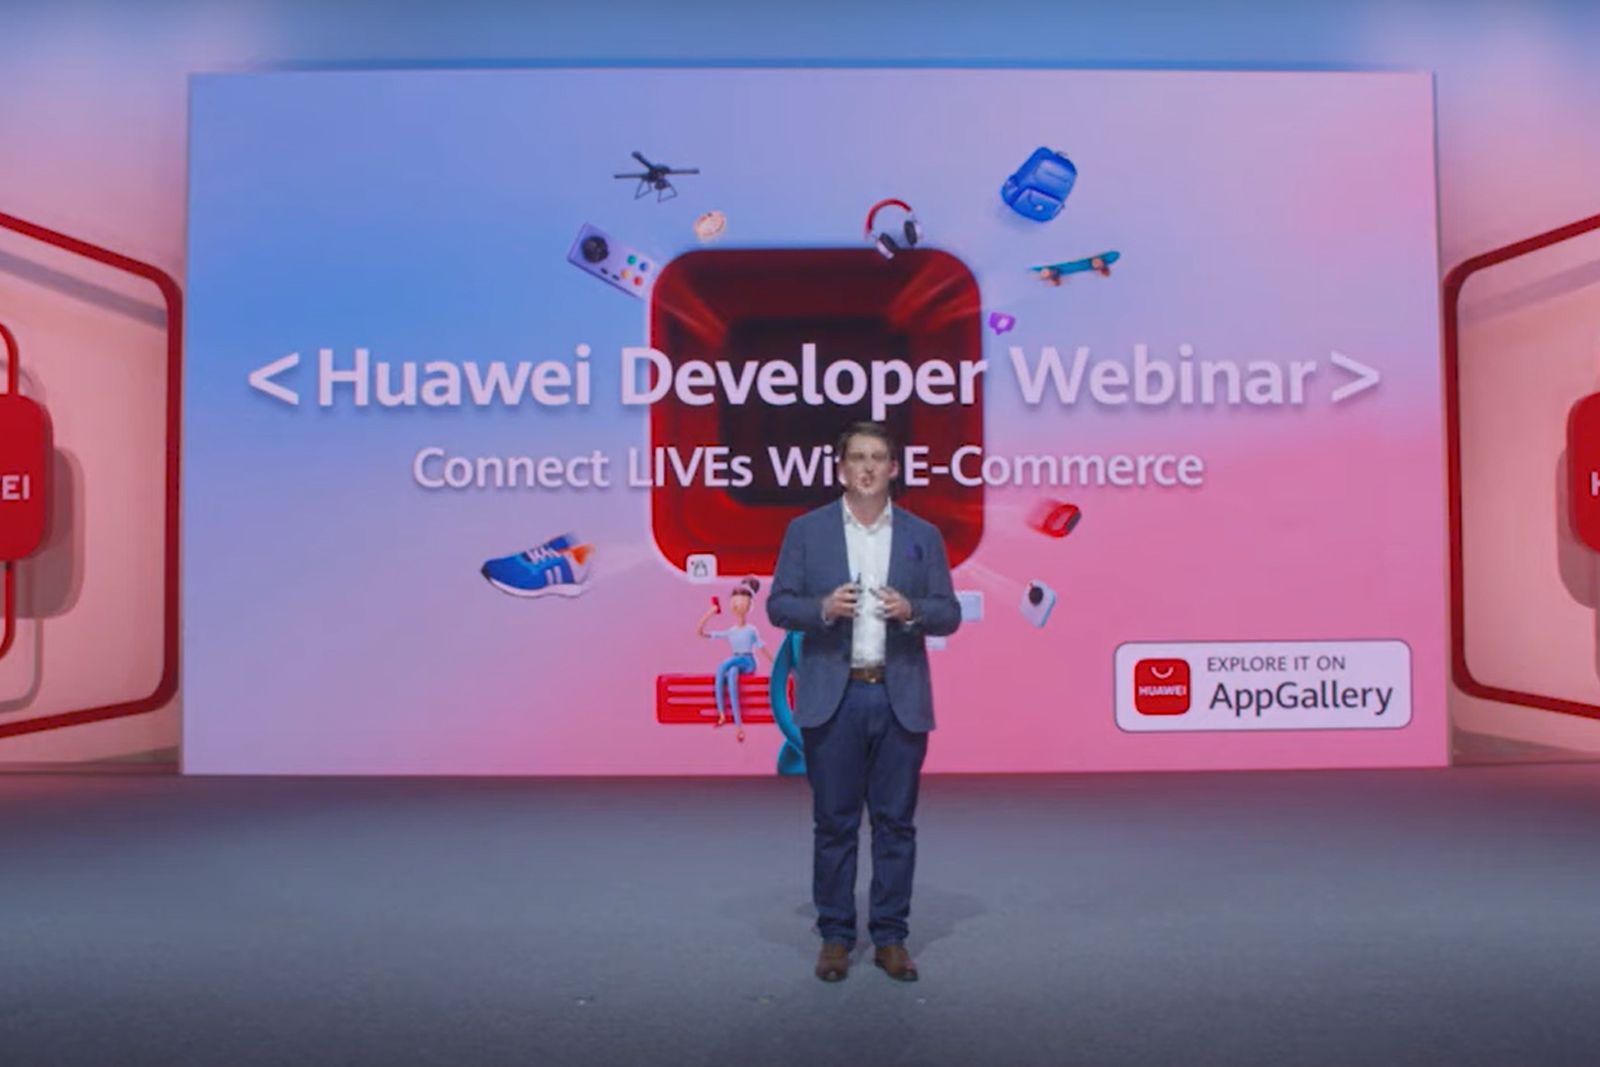 Huawei Developer Webinar 2020: What's it all about and what were the highlights? photo 2